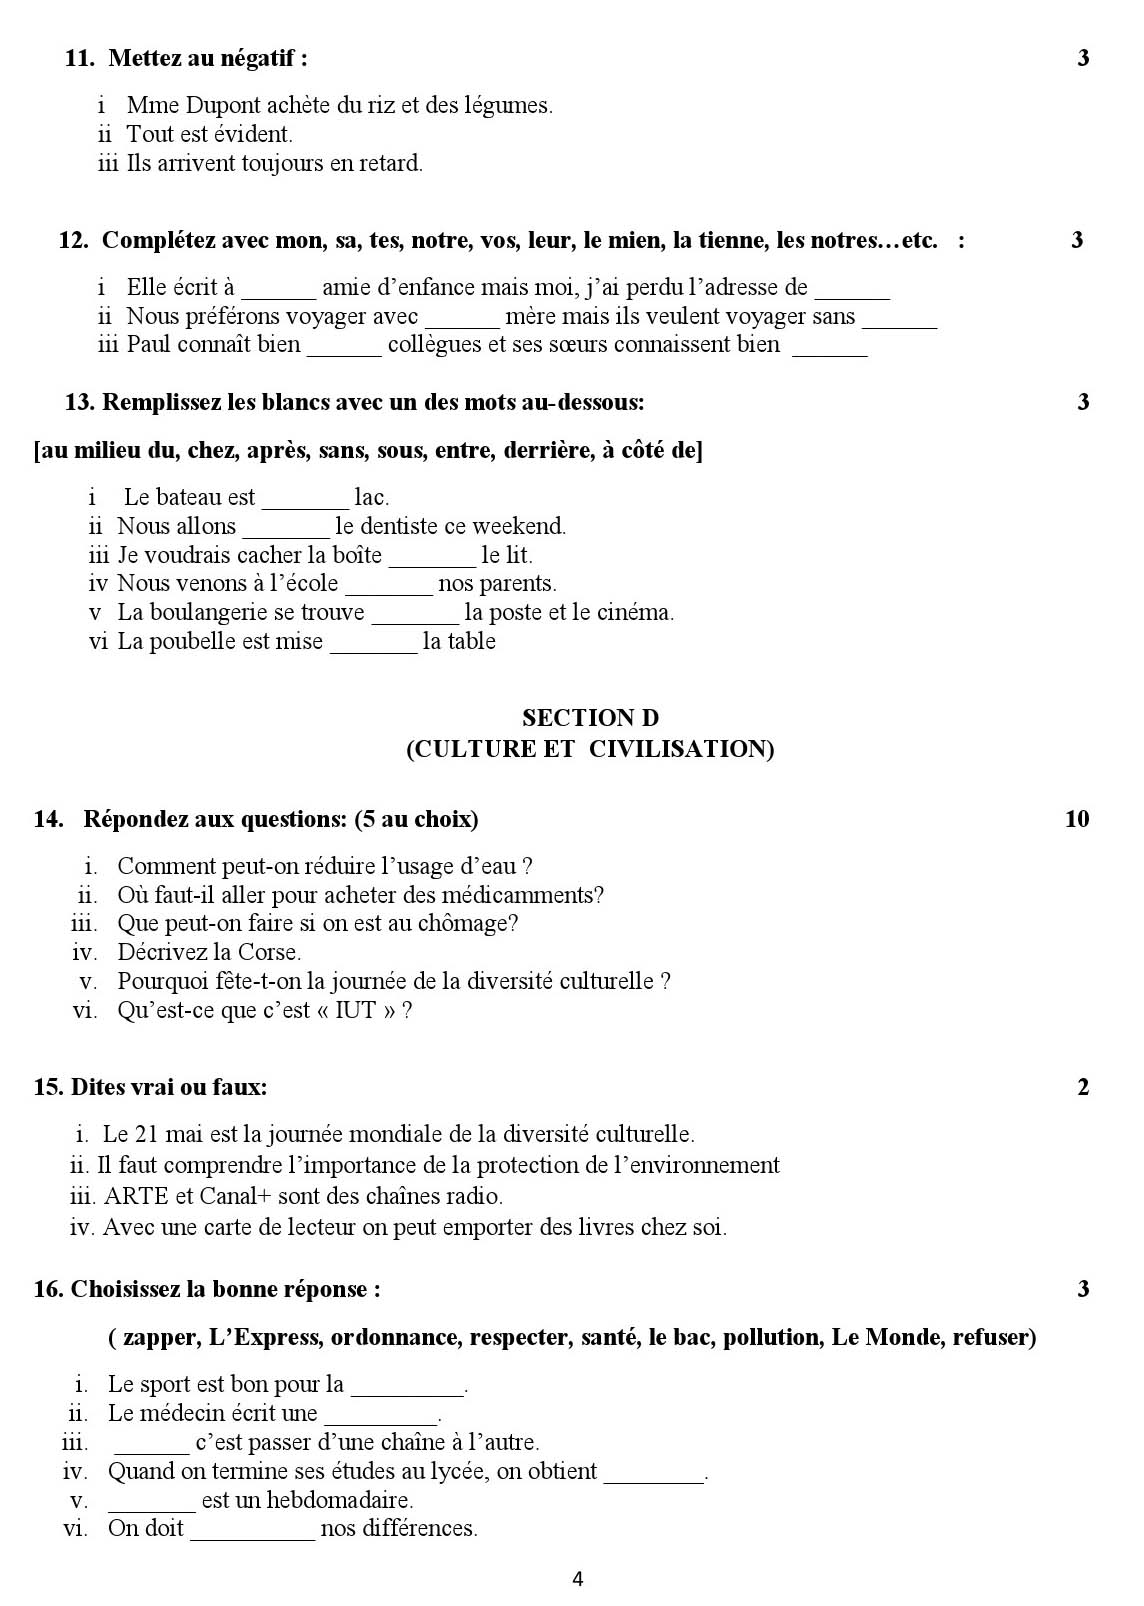 French CBSE Class X Sample Question Paper 2018-19 - Image 4